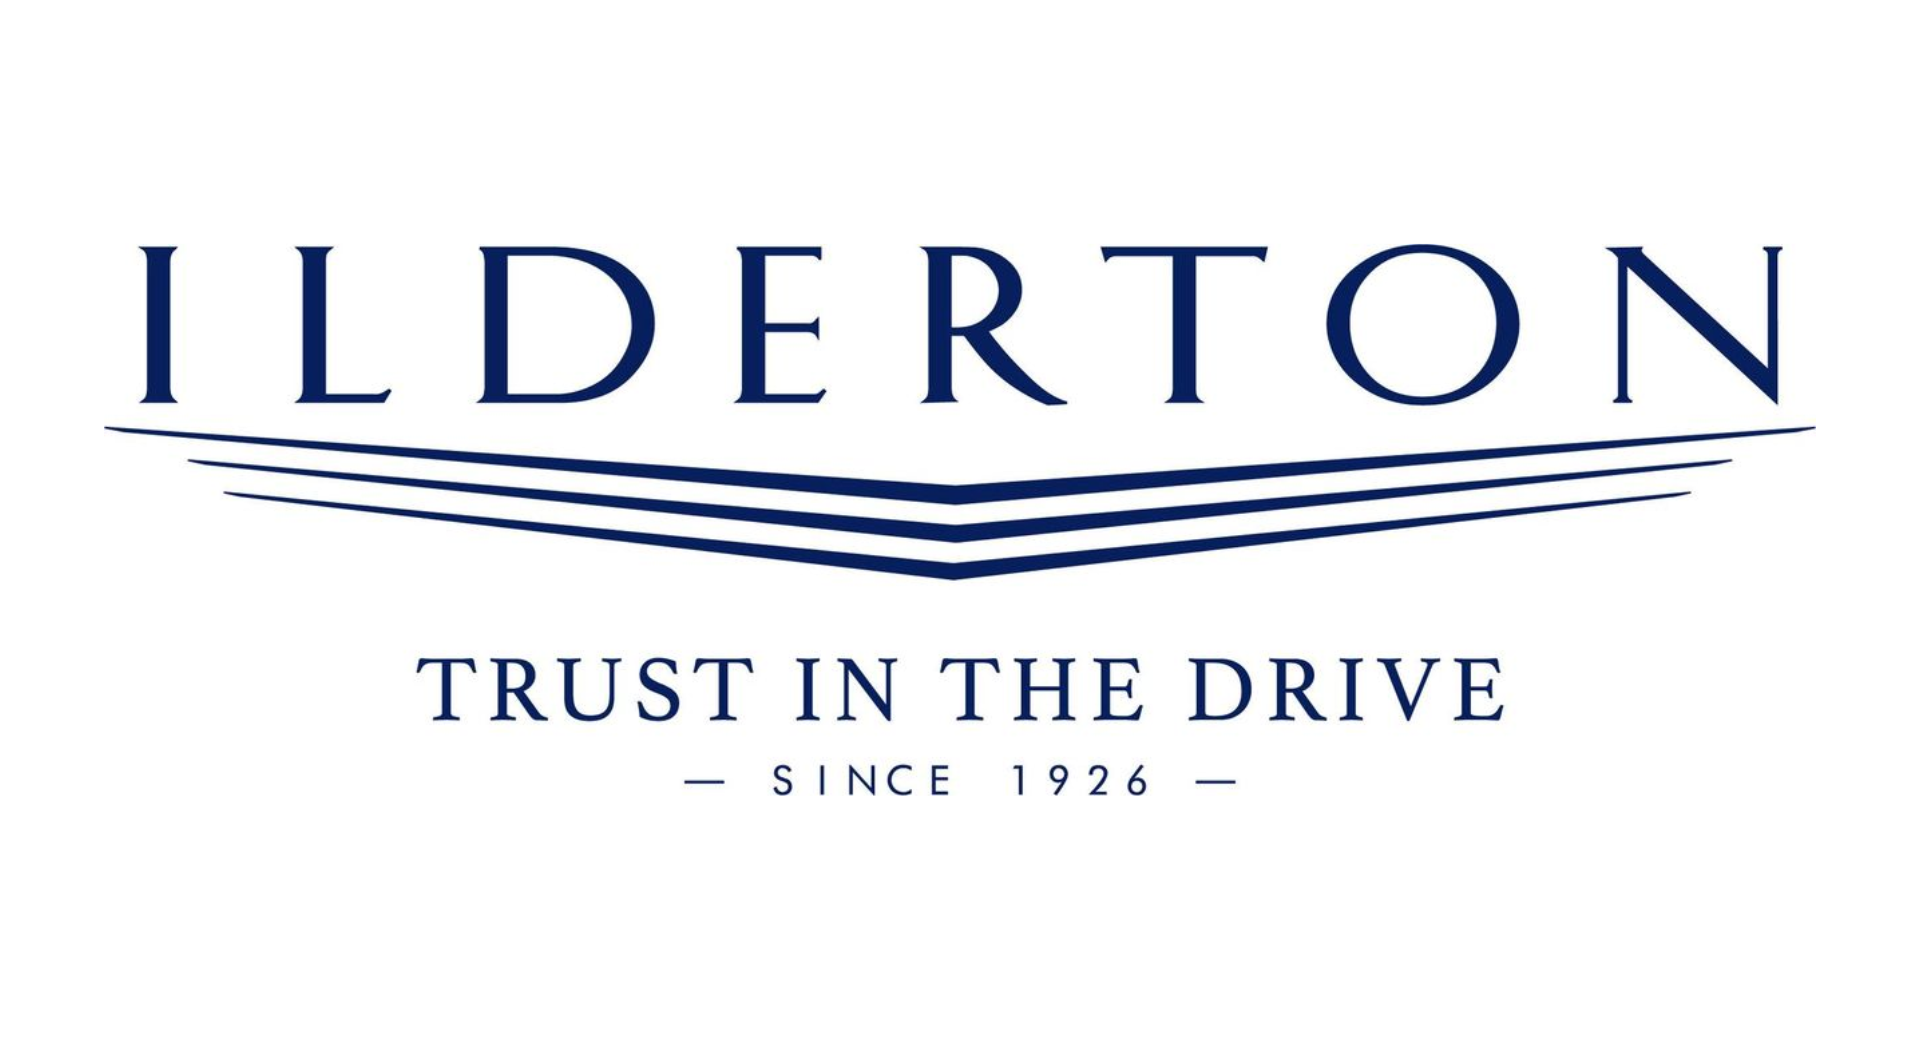 Ilderton DCJR is a Certified Agriculture Dealership